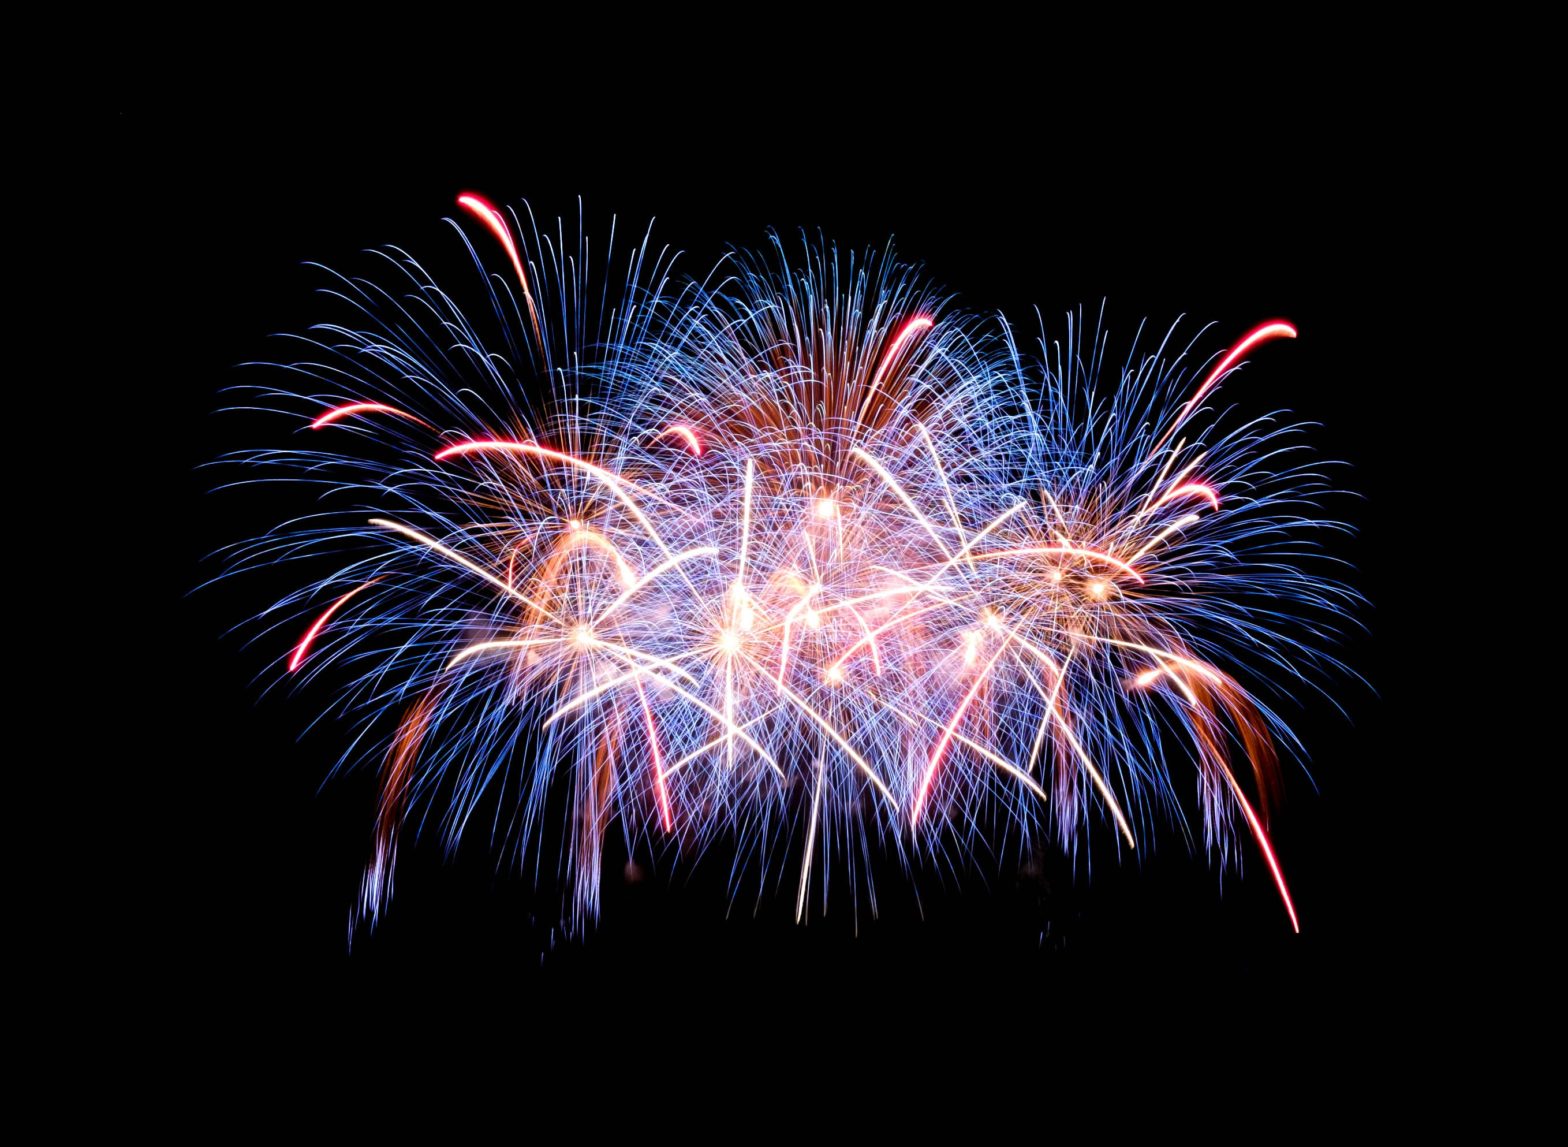 Fireworks Laws to Know for Your July 4th Celebration 